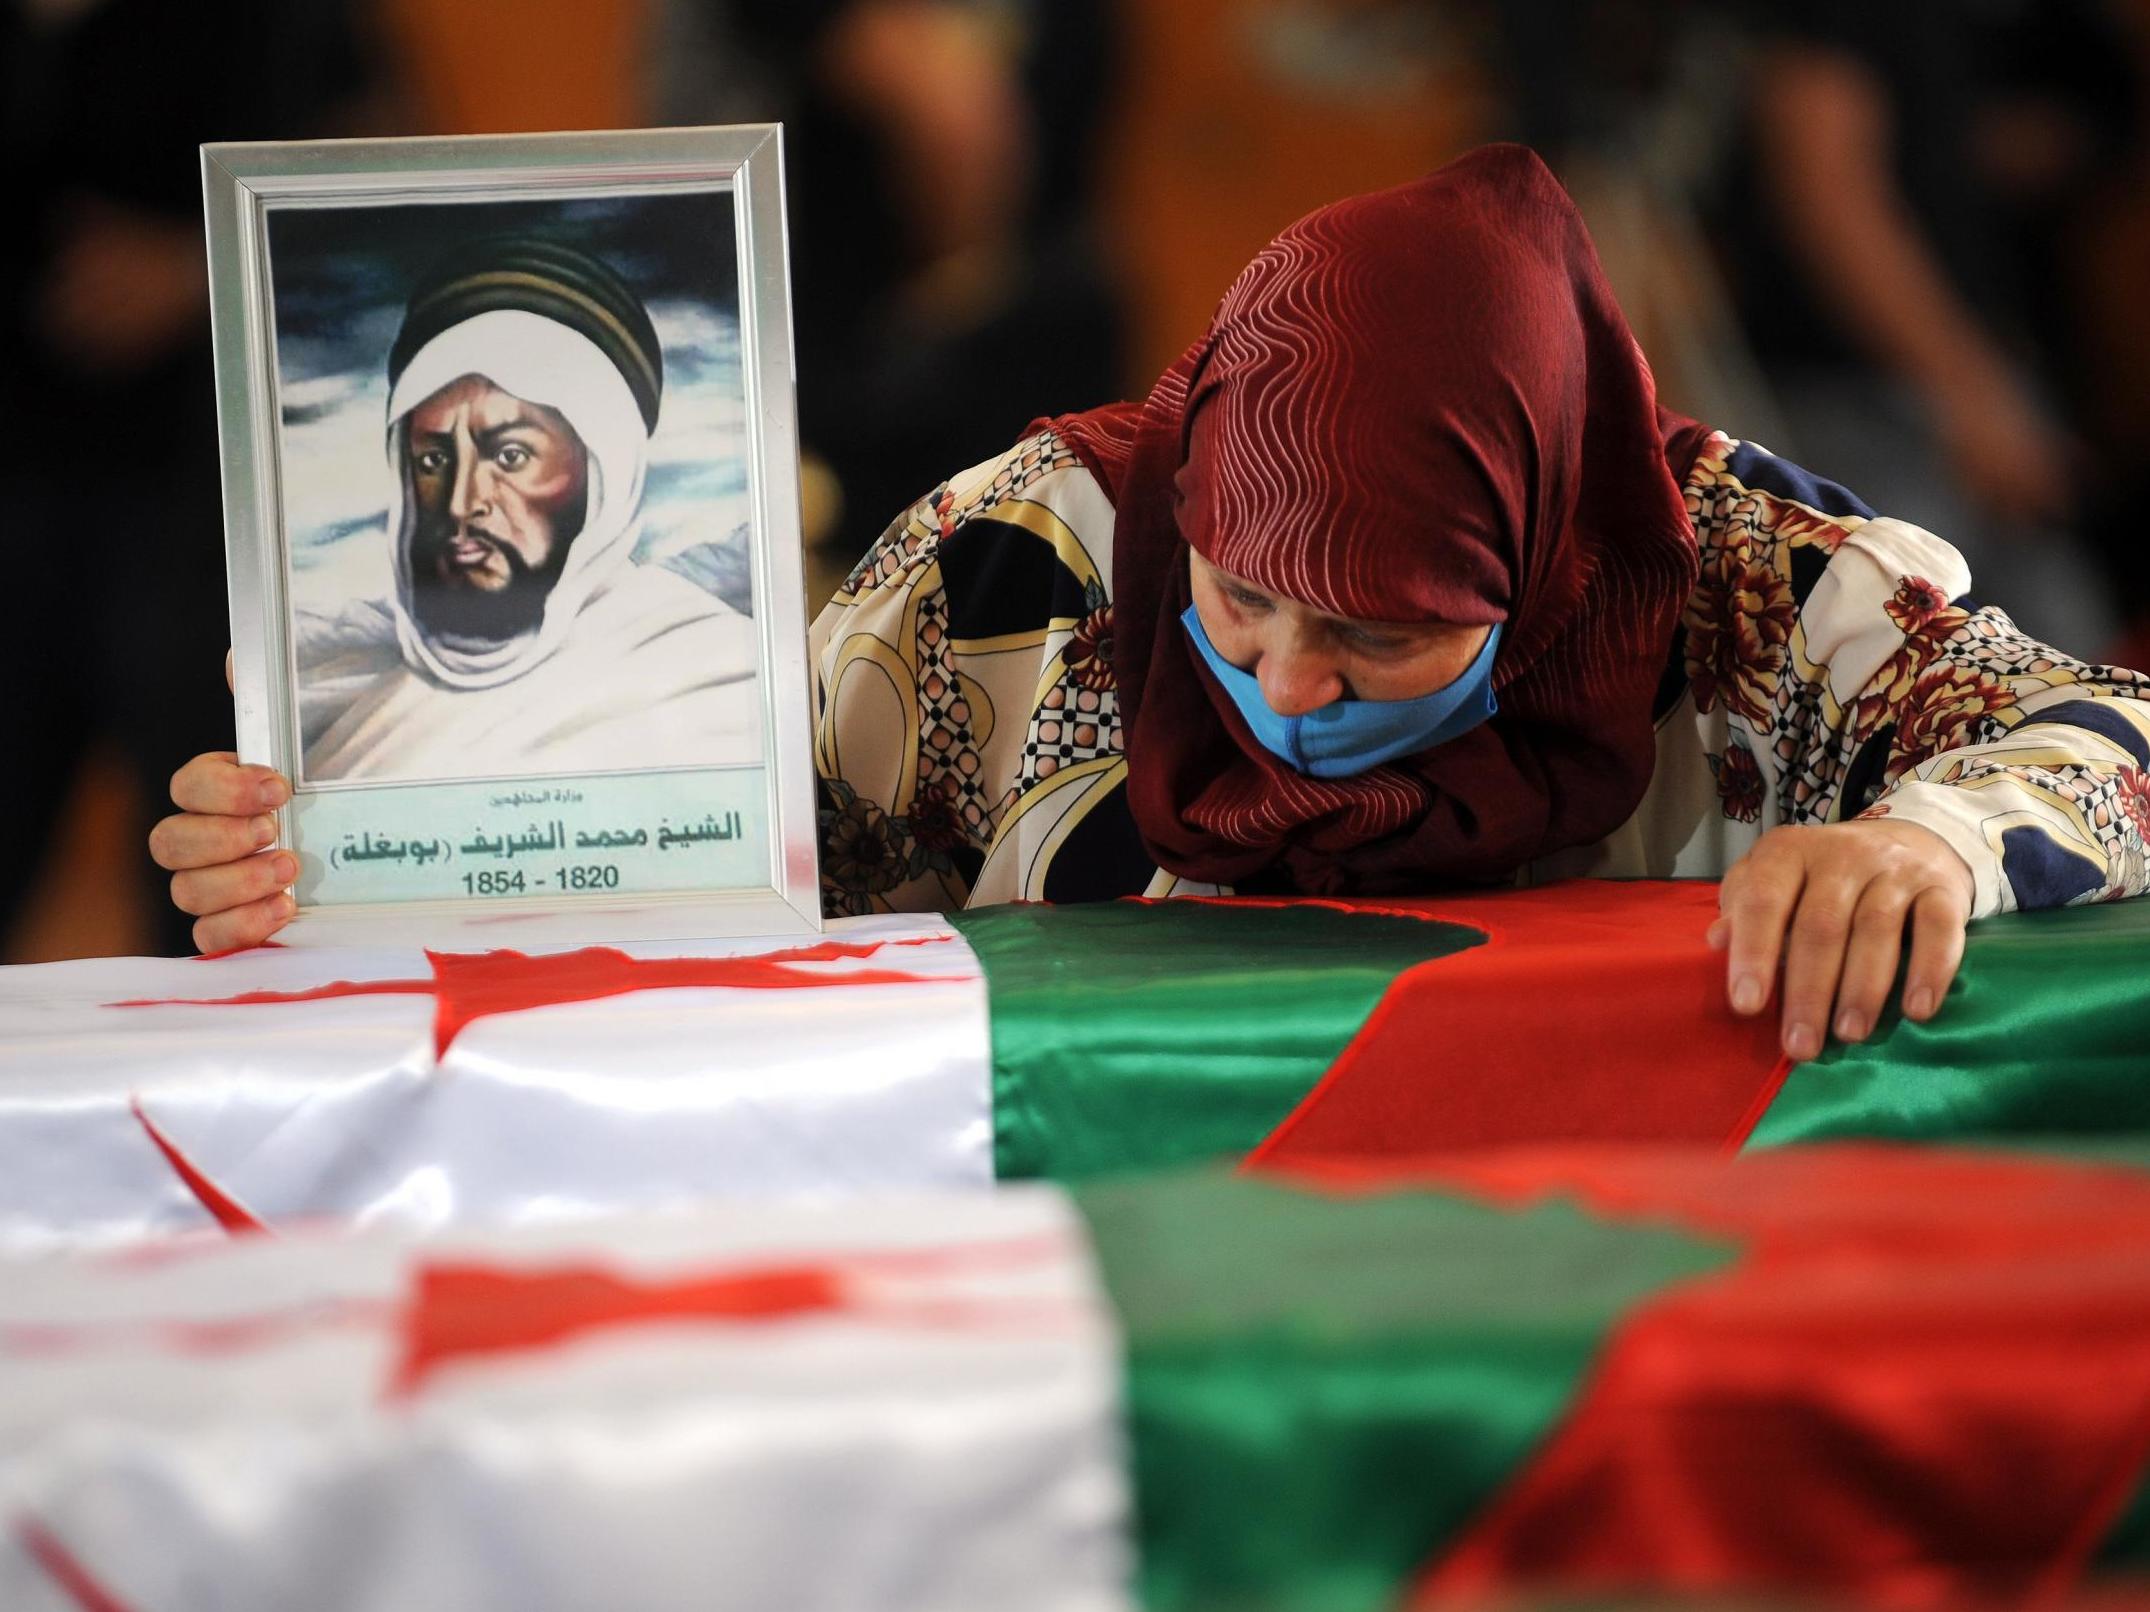 A woman mourns over one of the coffins containing the remains of 24 Algerian resistance fighters